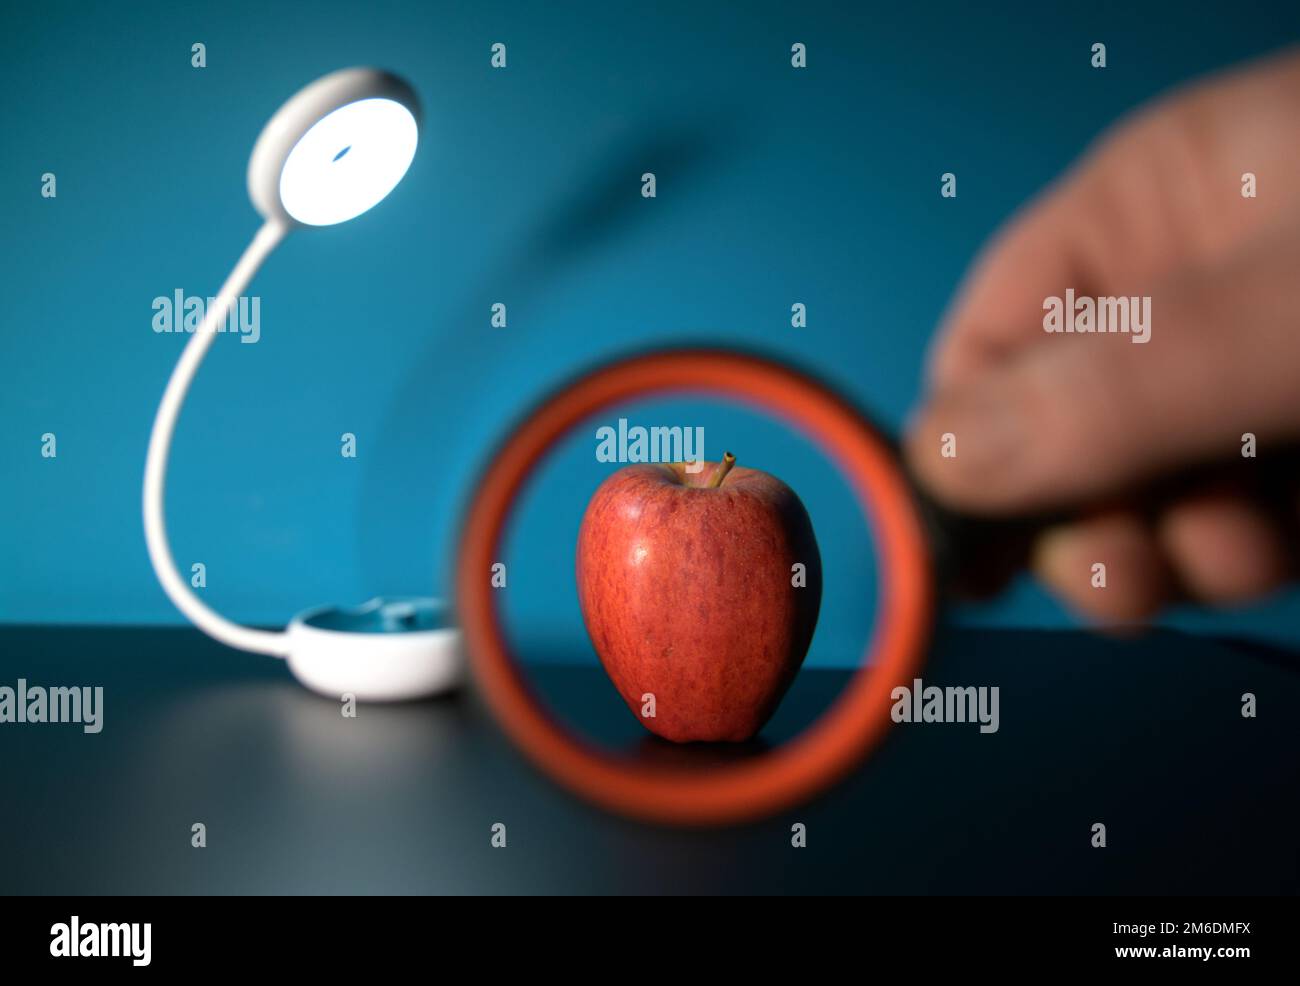 Looking at an apple through a magnifying glass Stock Photo